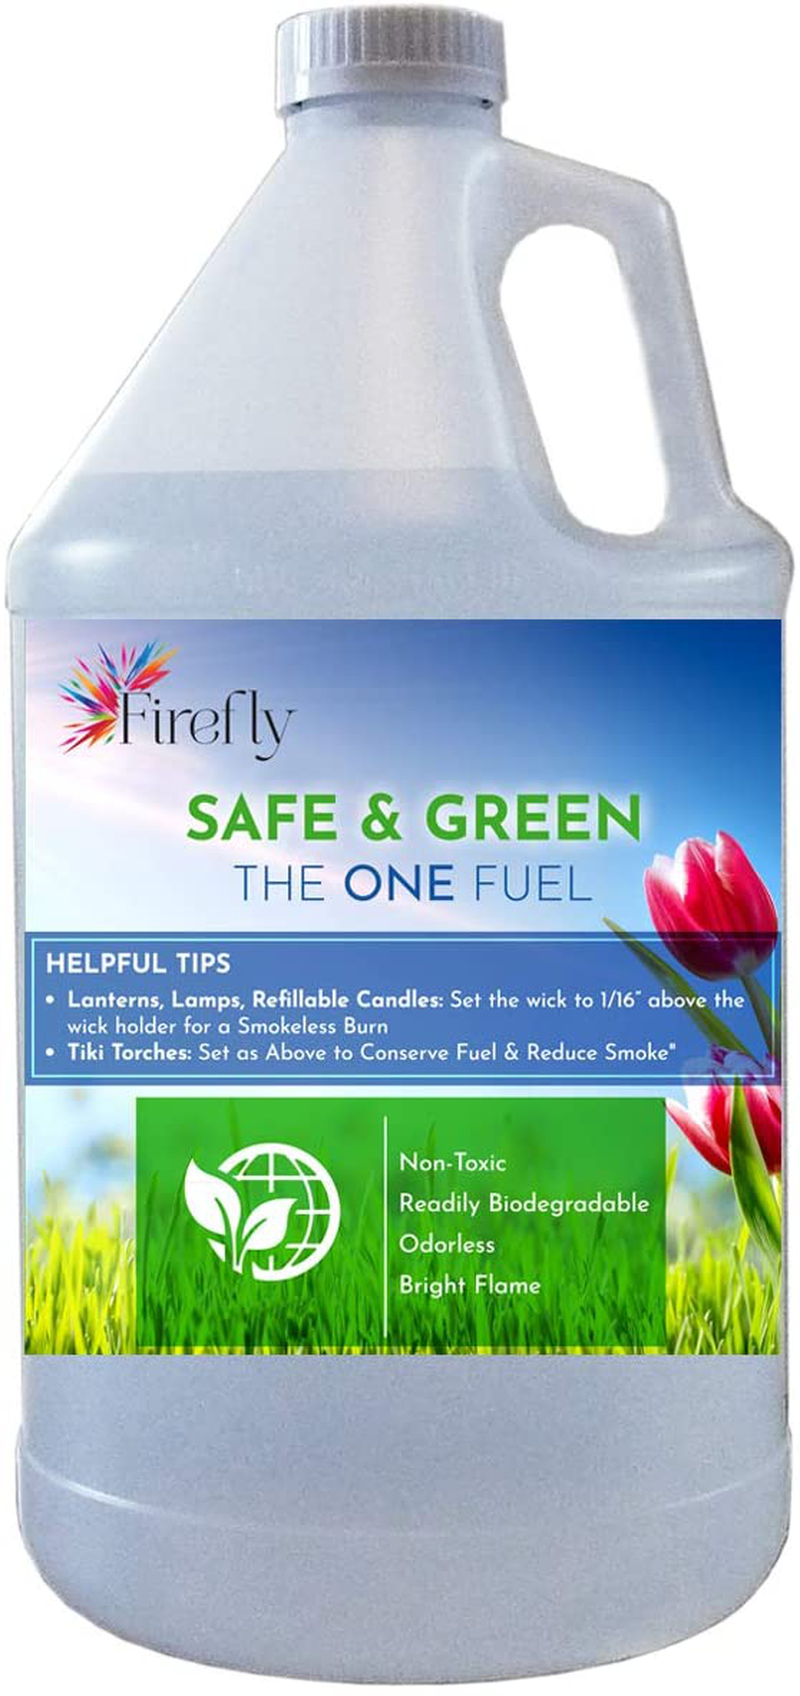 Firefly Kosher Safe and Green Eco-Friendly Lamp Oil - Non Toxic - Biodegradable - Virtually Odorless - Paraffin Alternative - Indoor Outdoor Use - Lamps, Lanterns, Candles, Patio Tiki Torches - 16 Oz